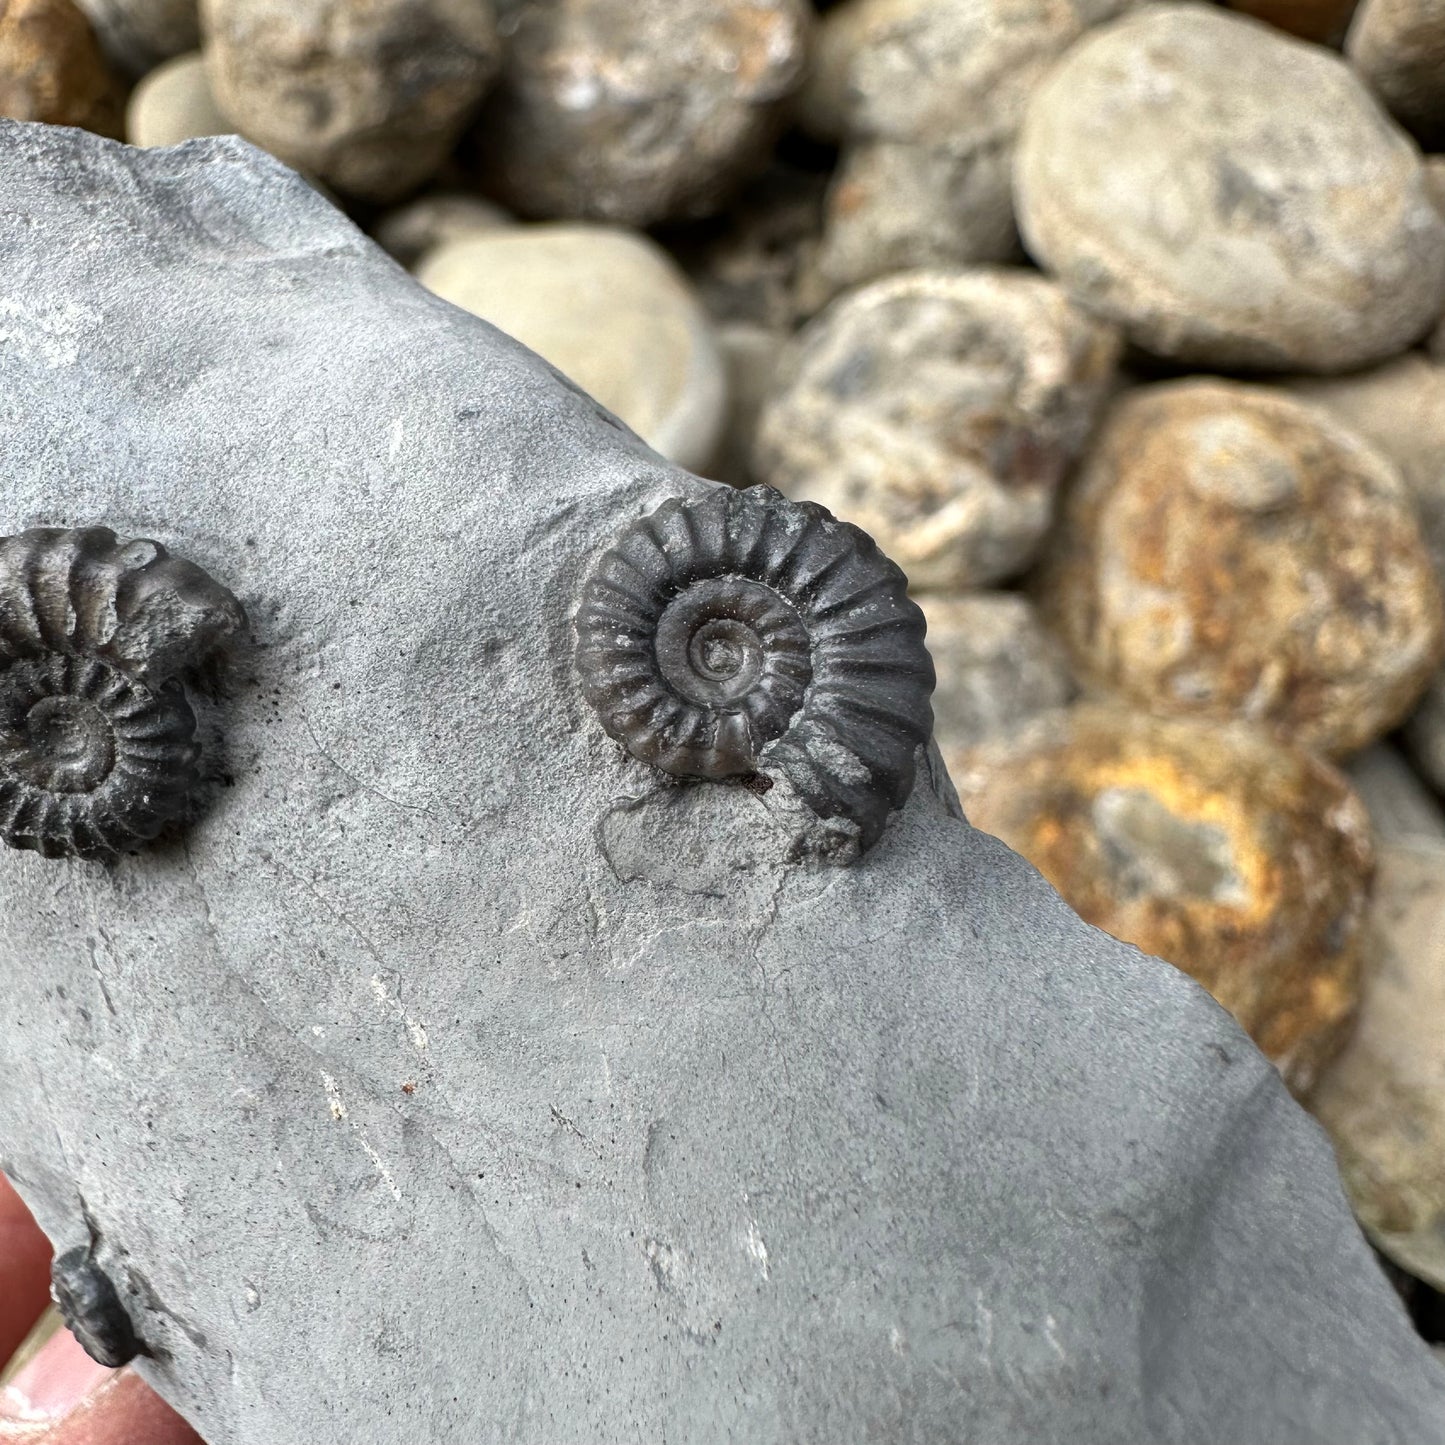 Promiceras ammonite fossil - Whitby, North Yorkshire